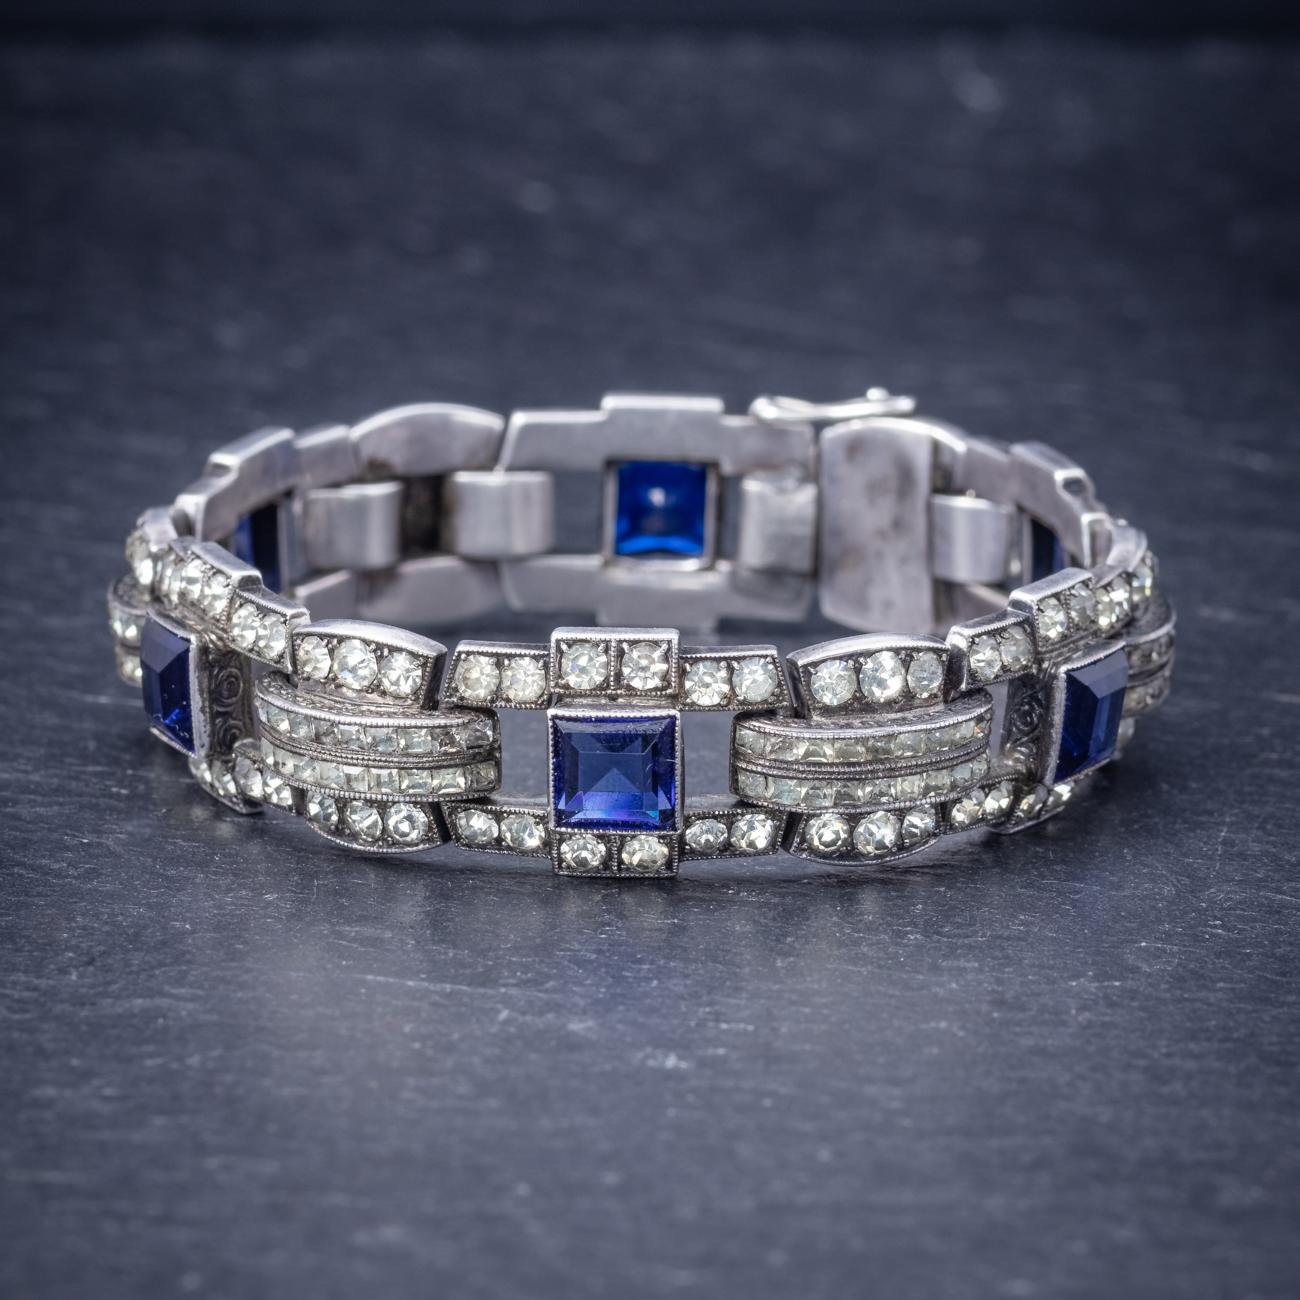 A beautiful Art Deco bracelet made up of robust Silver links with a typical Art Deco geometric design. The piece is decorated in square cut Bristol blue Paste stones which have the deep colouring of Sapphires and are complemented by smaller white